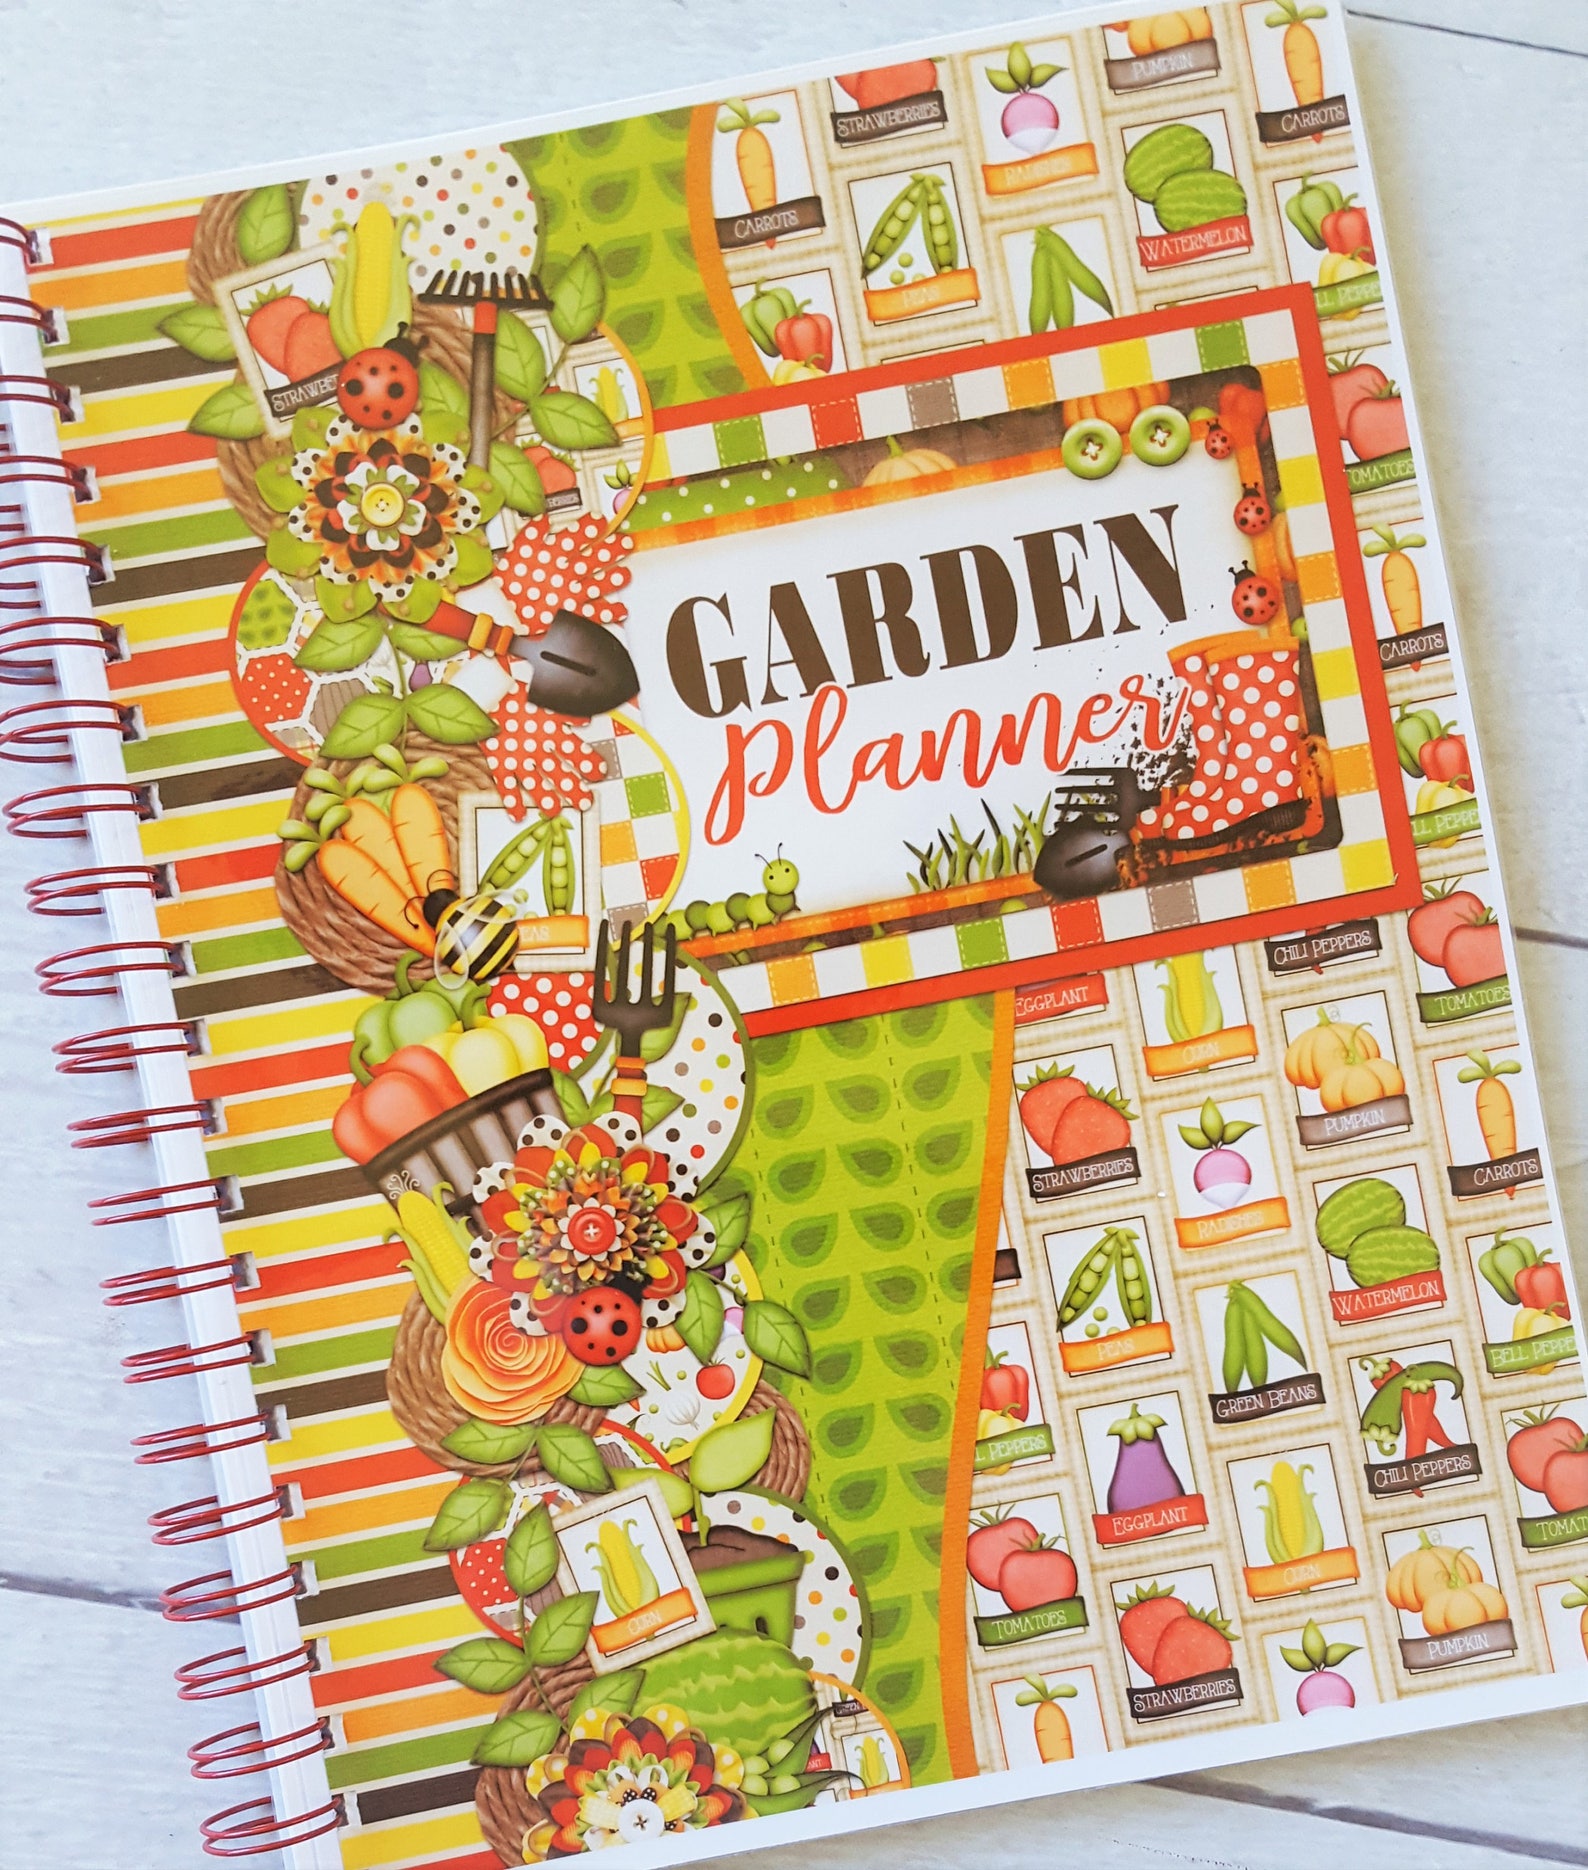 the garden planner and record book